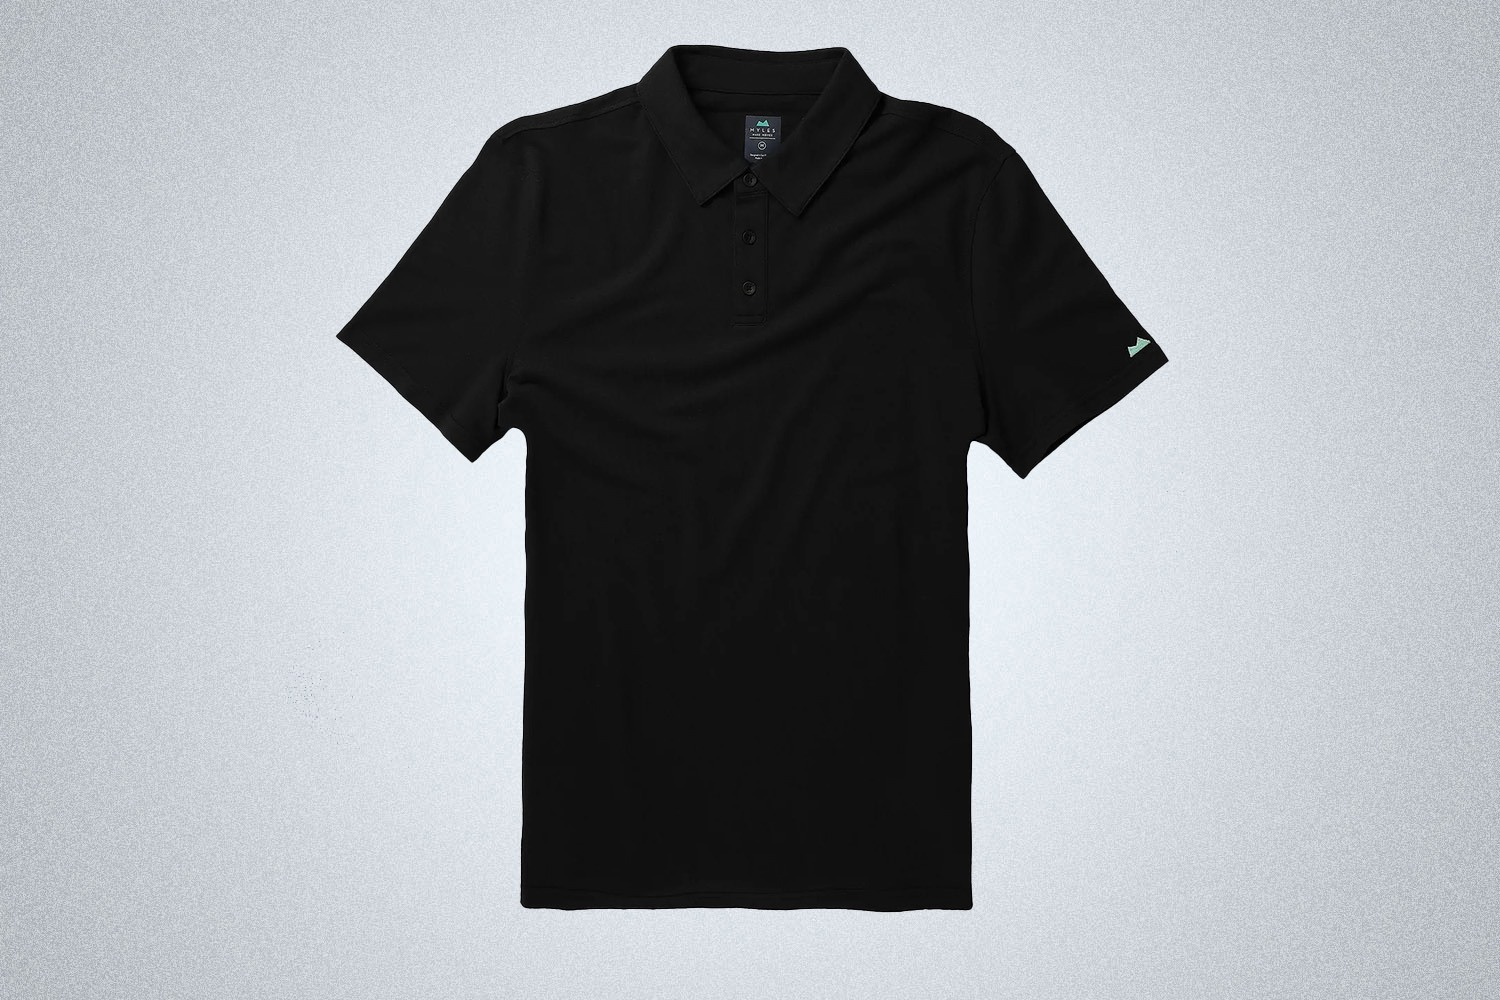 a black short sleeve polo from Myles Apparel on a grey background